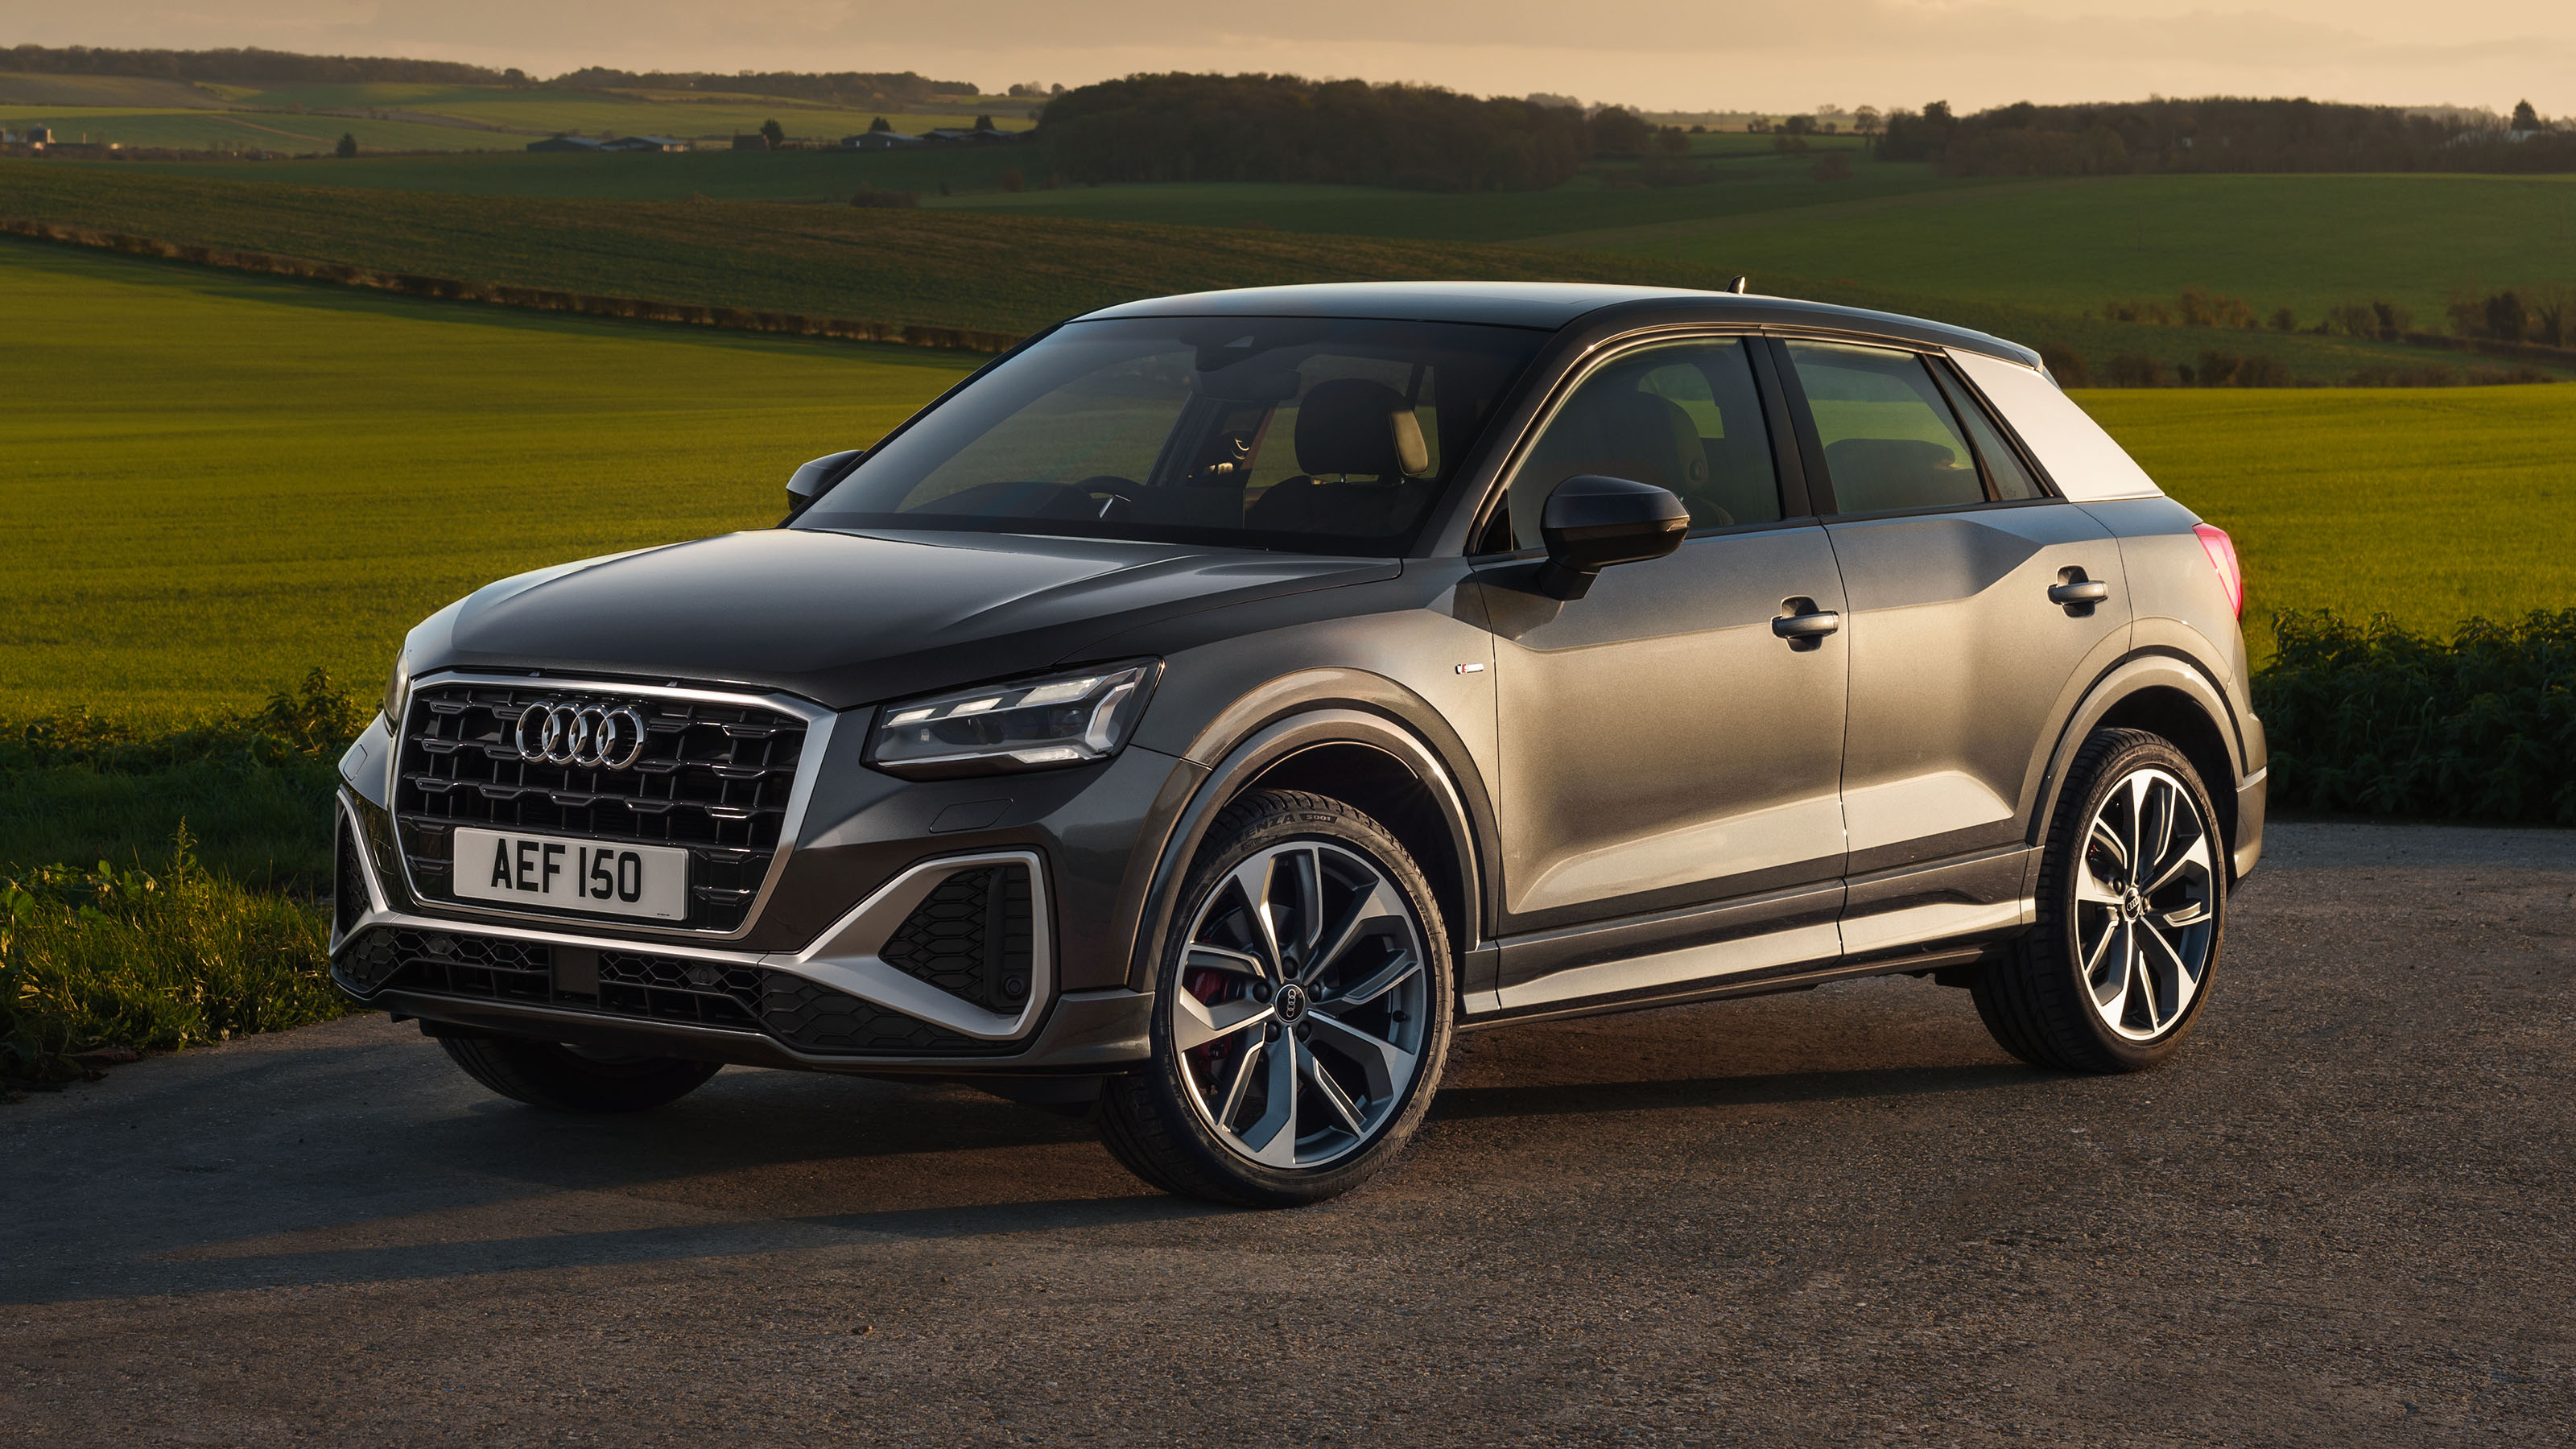 Audi Q2 SUV MPG, running costs & CO2 2020 review Carbuyer